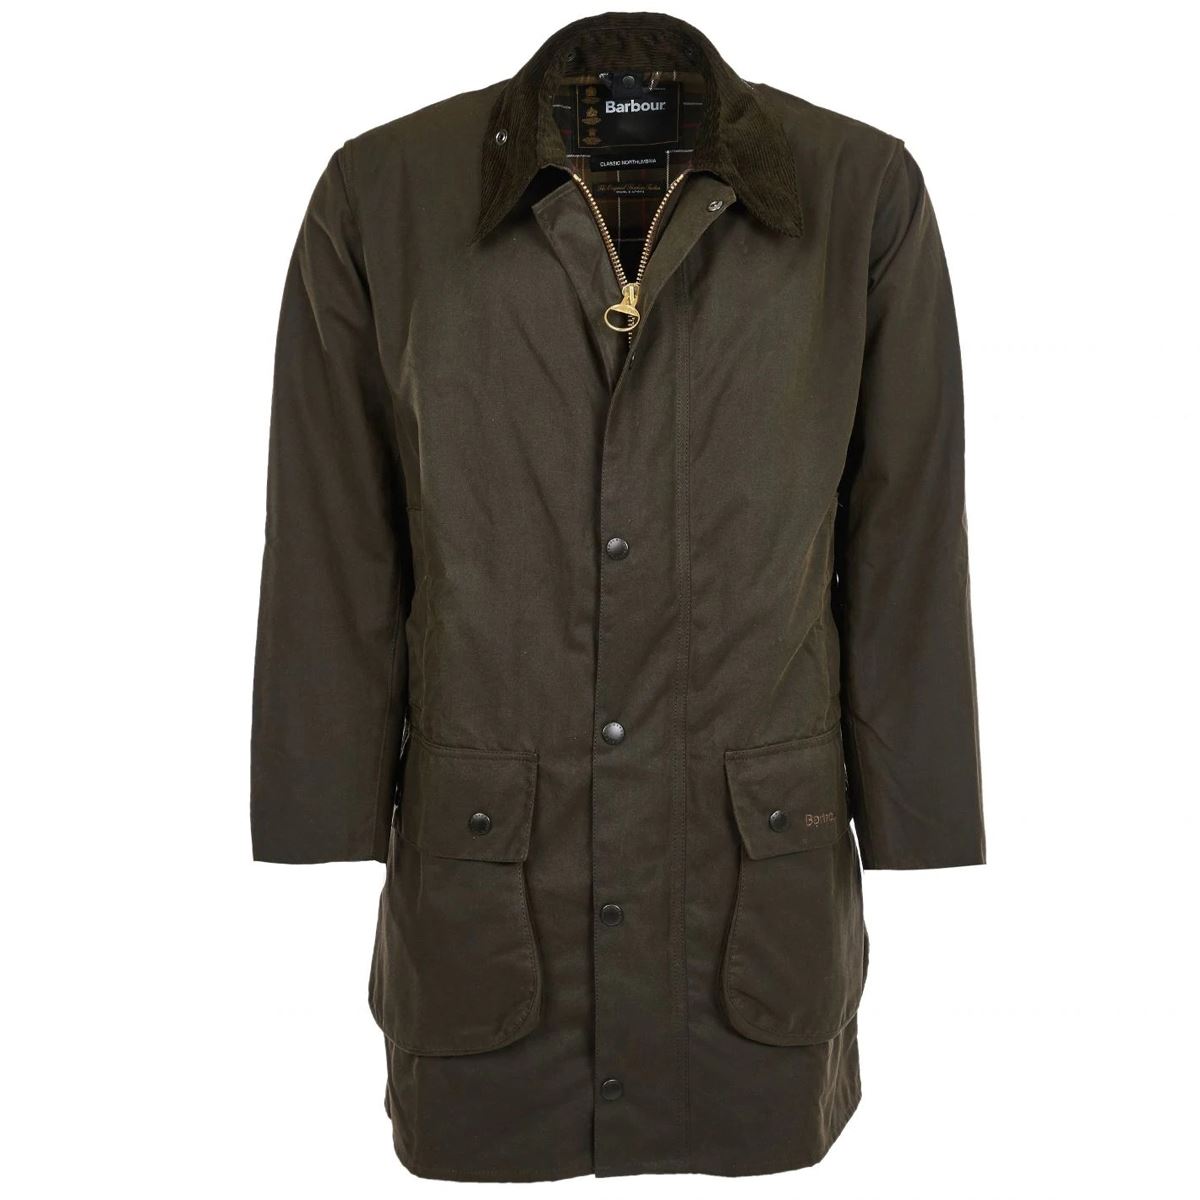 What are the reference and manufacturer part numbers for the Barbour Northumbria jacket?